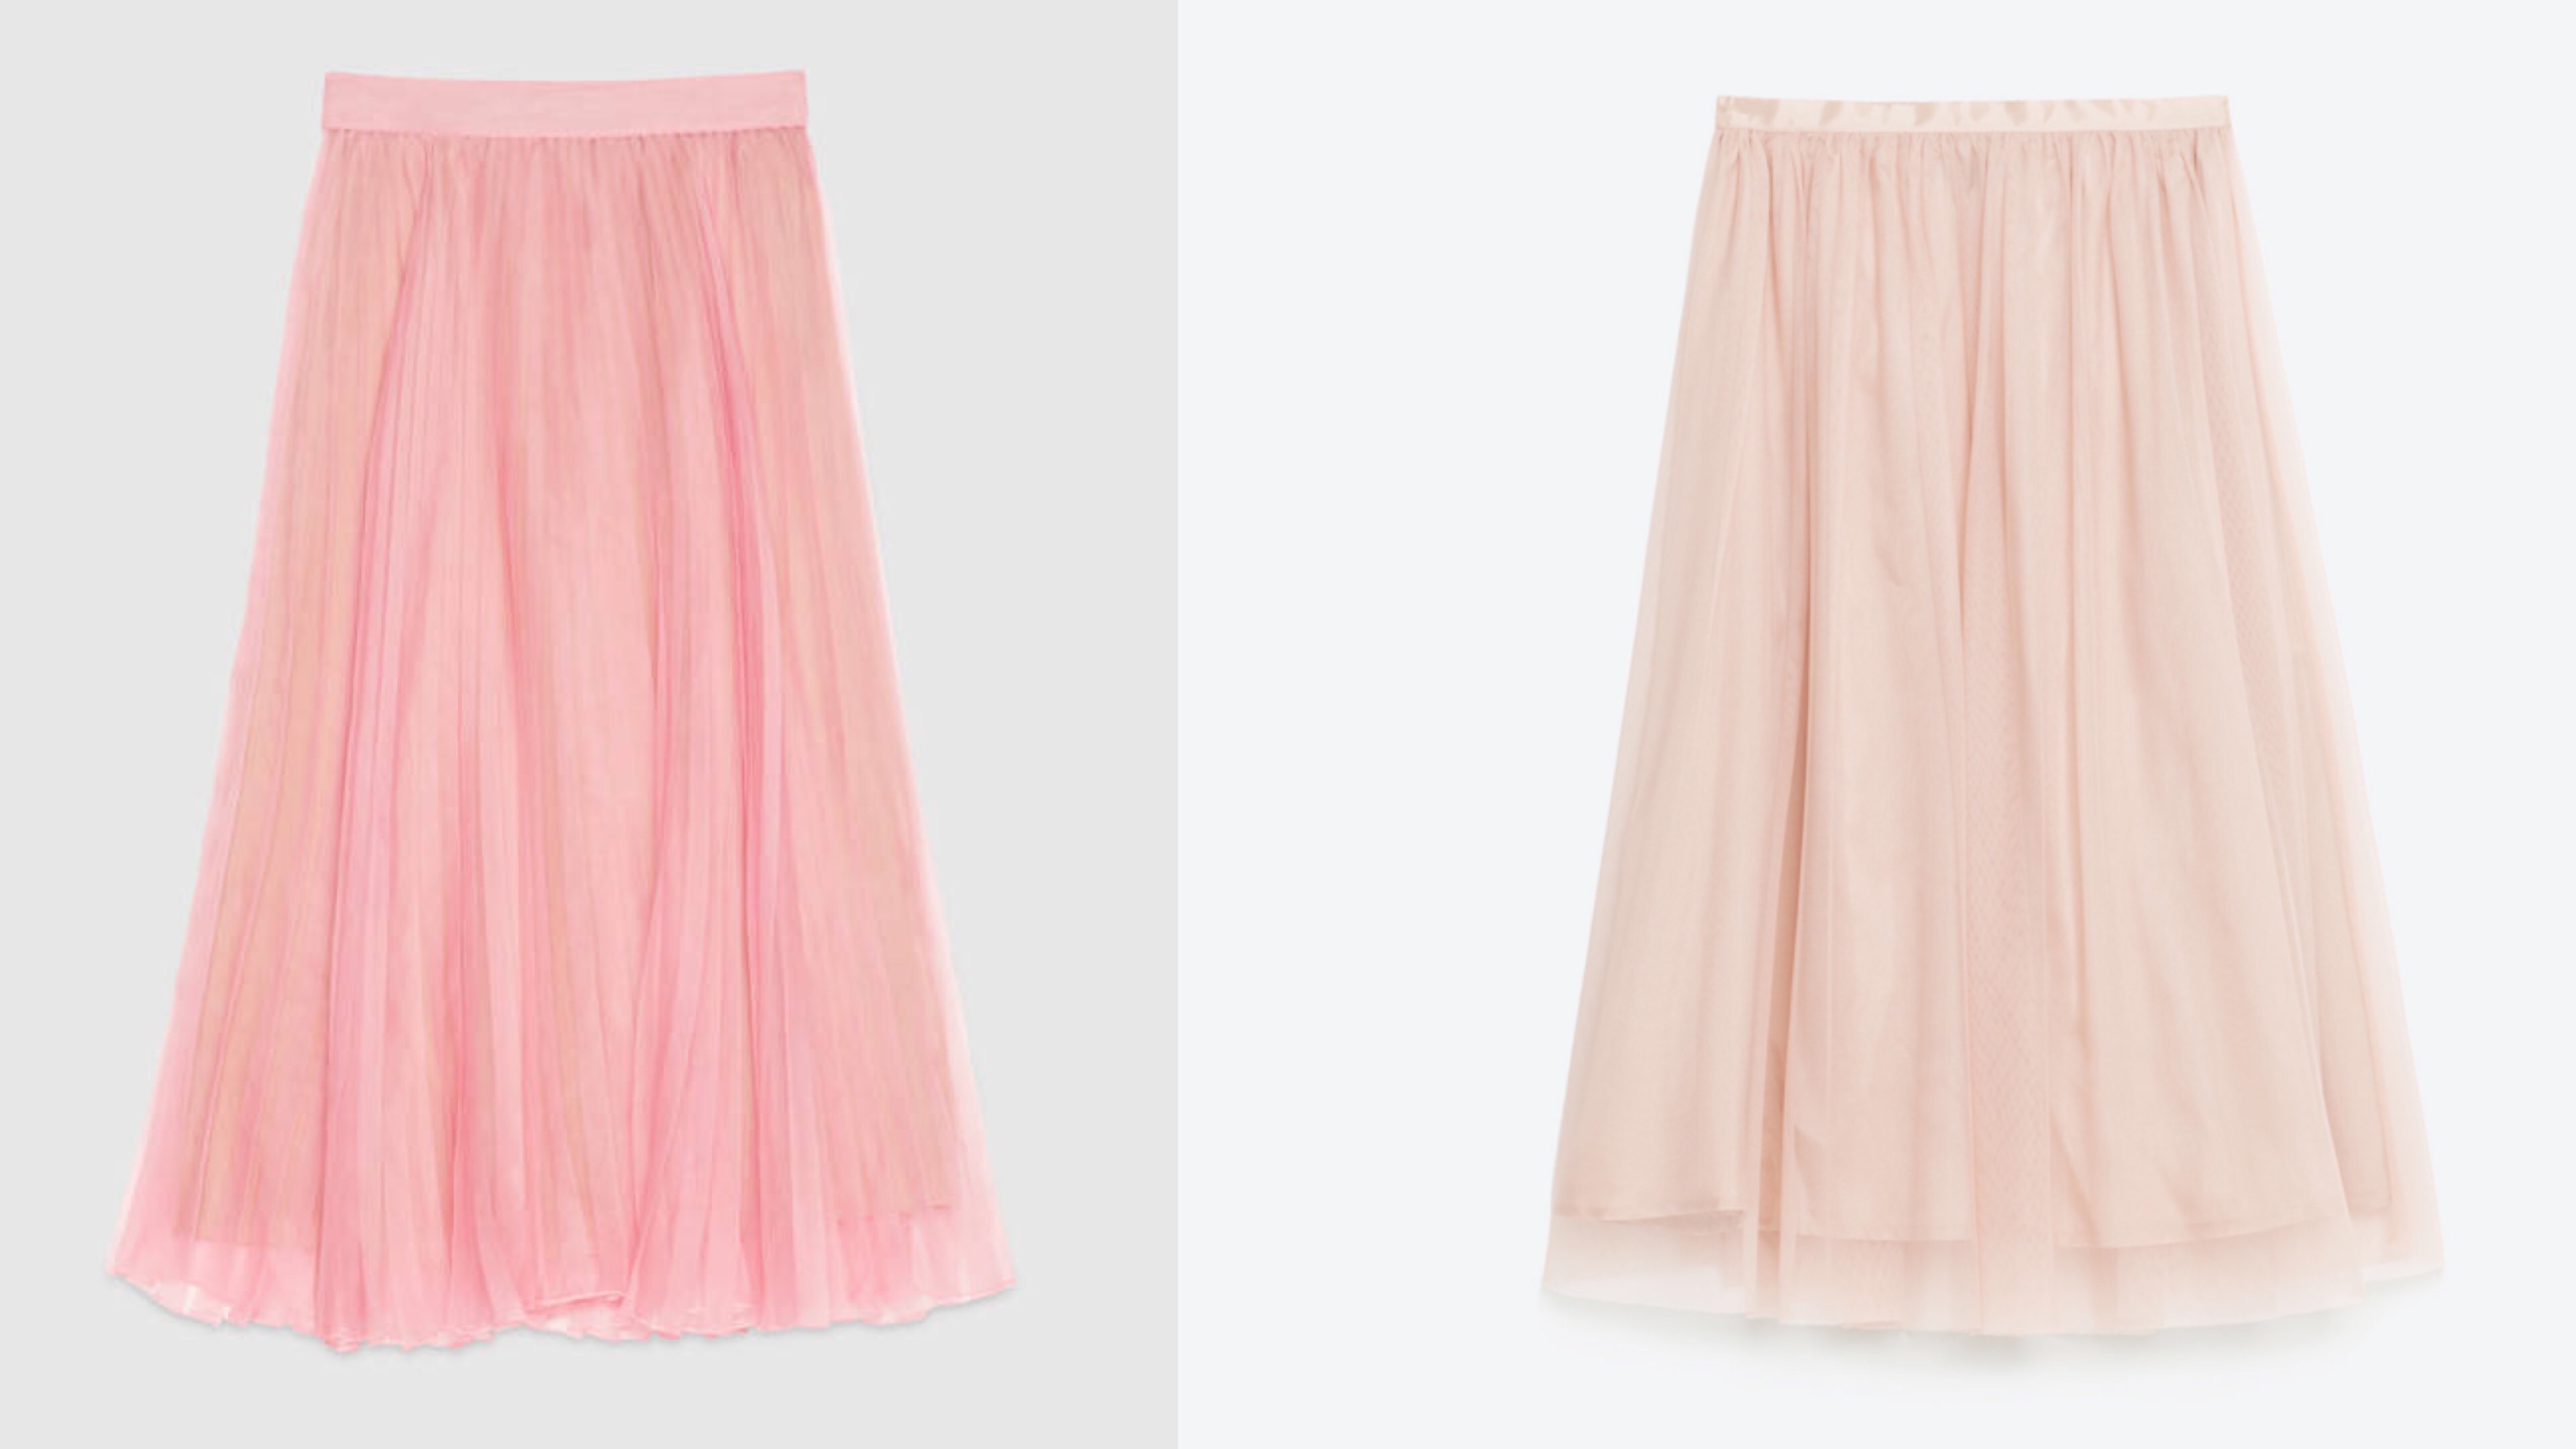 Gucci and Zara Pink Tulle Skirts